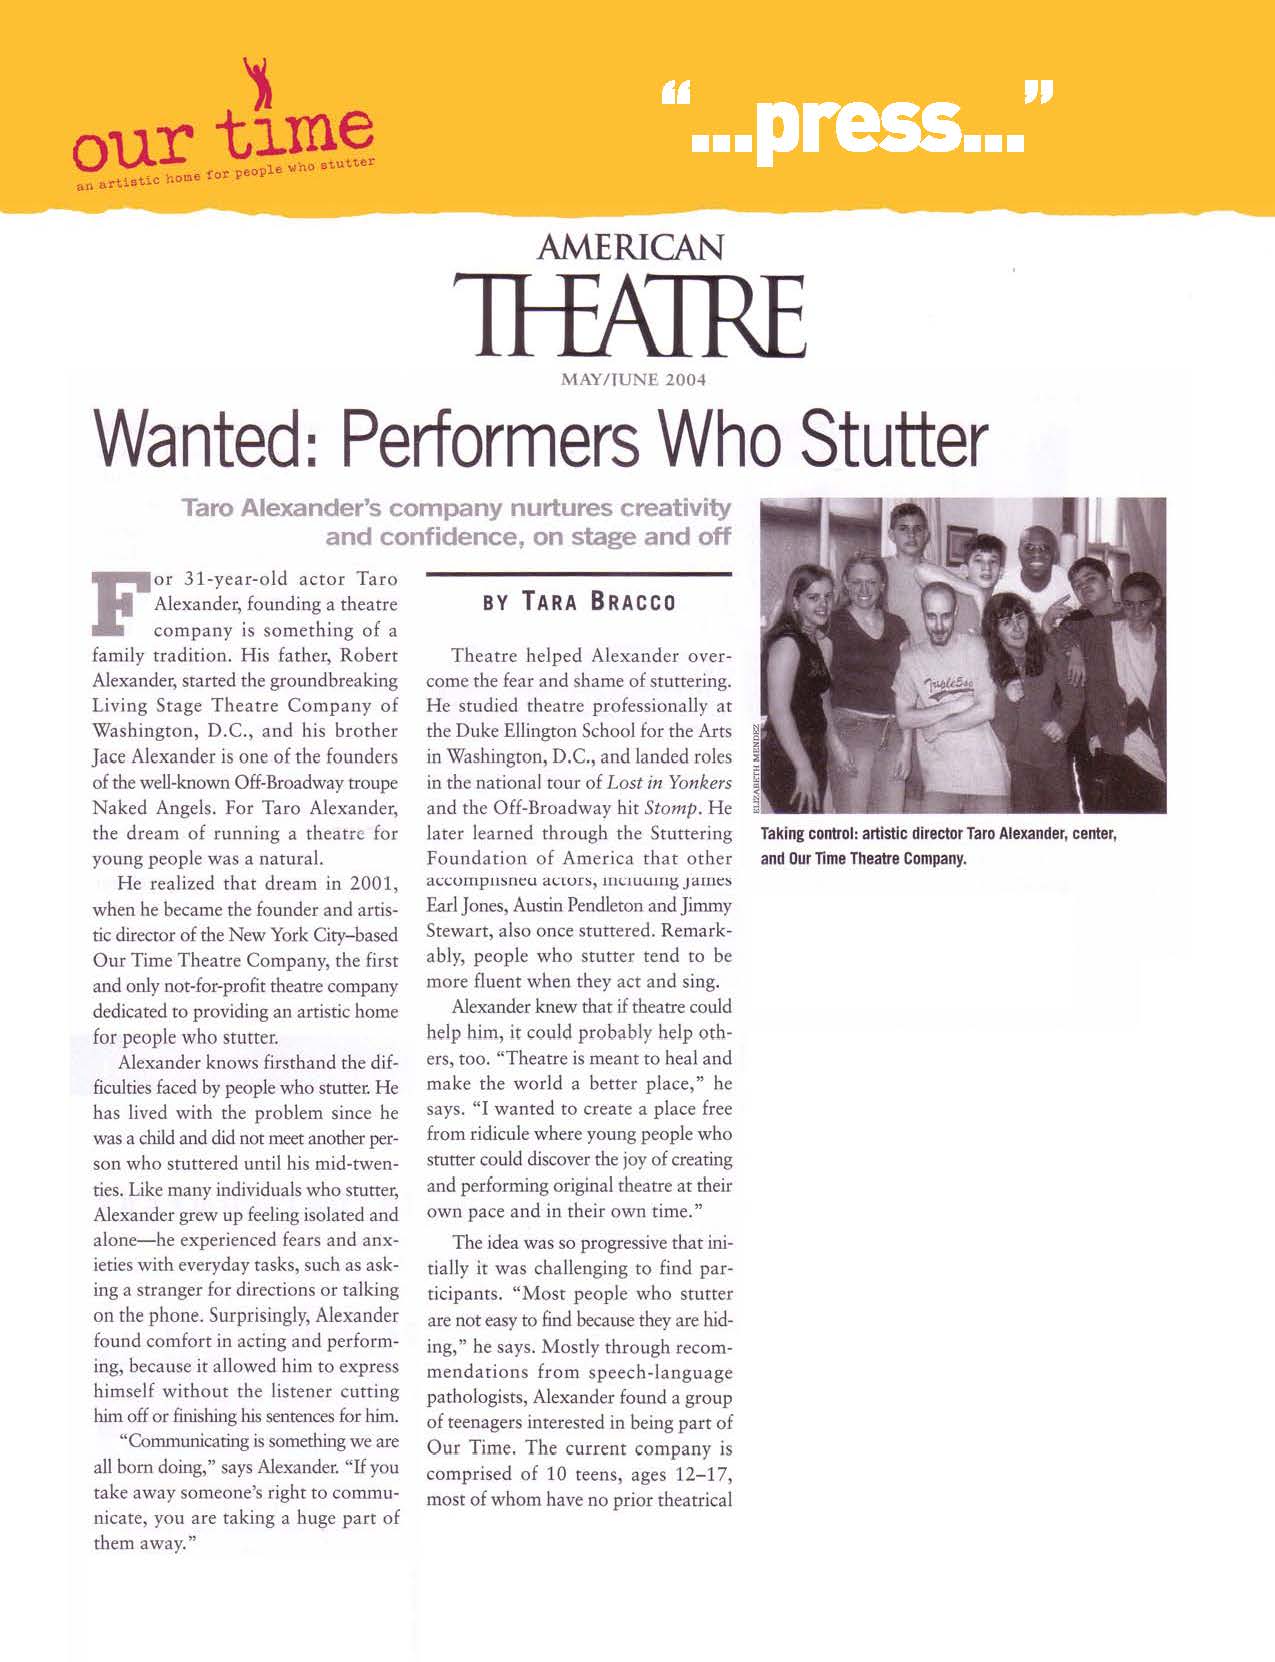 Wanted: Performers Who Stutter